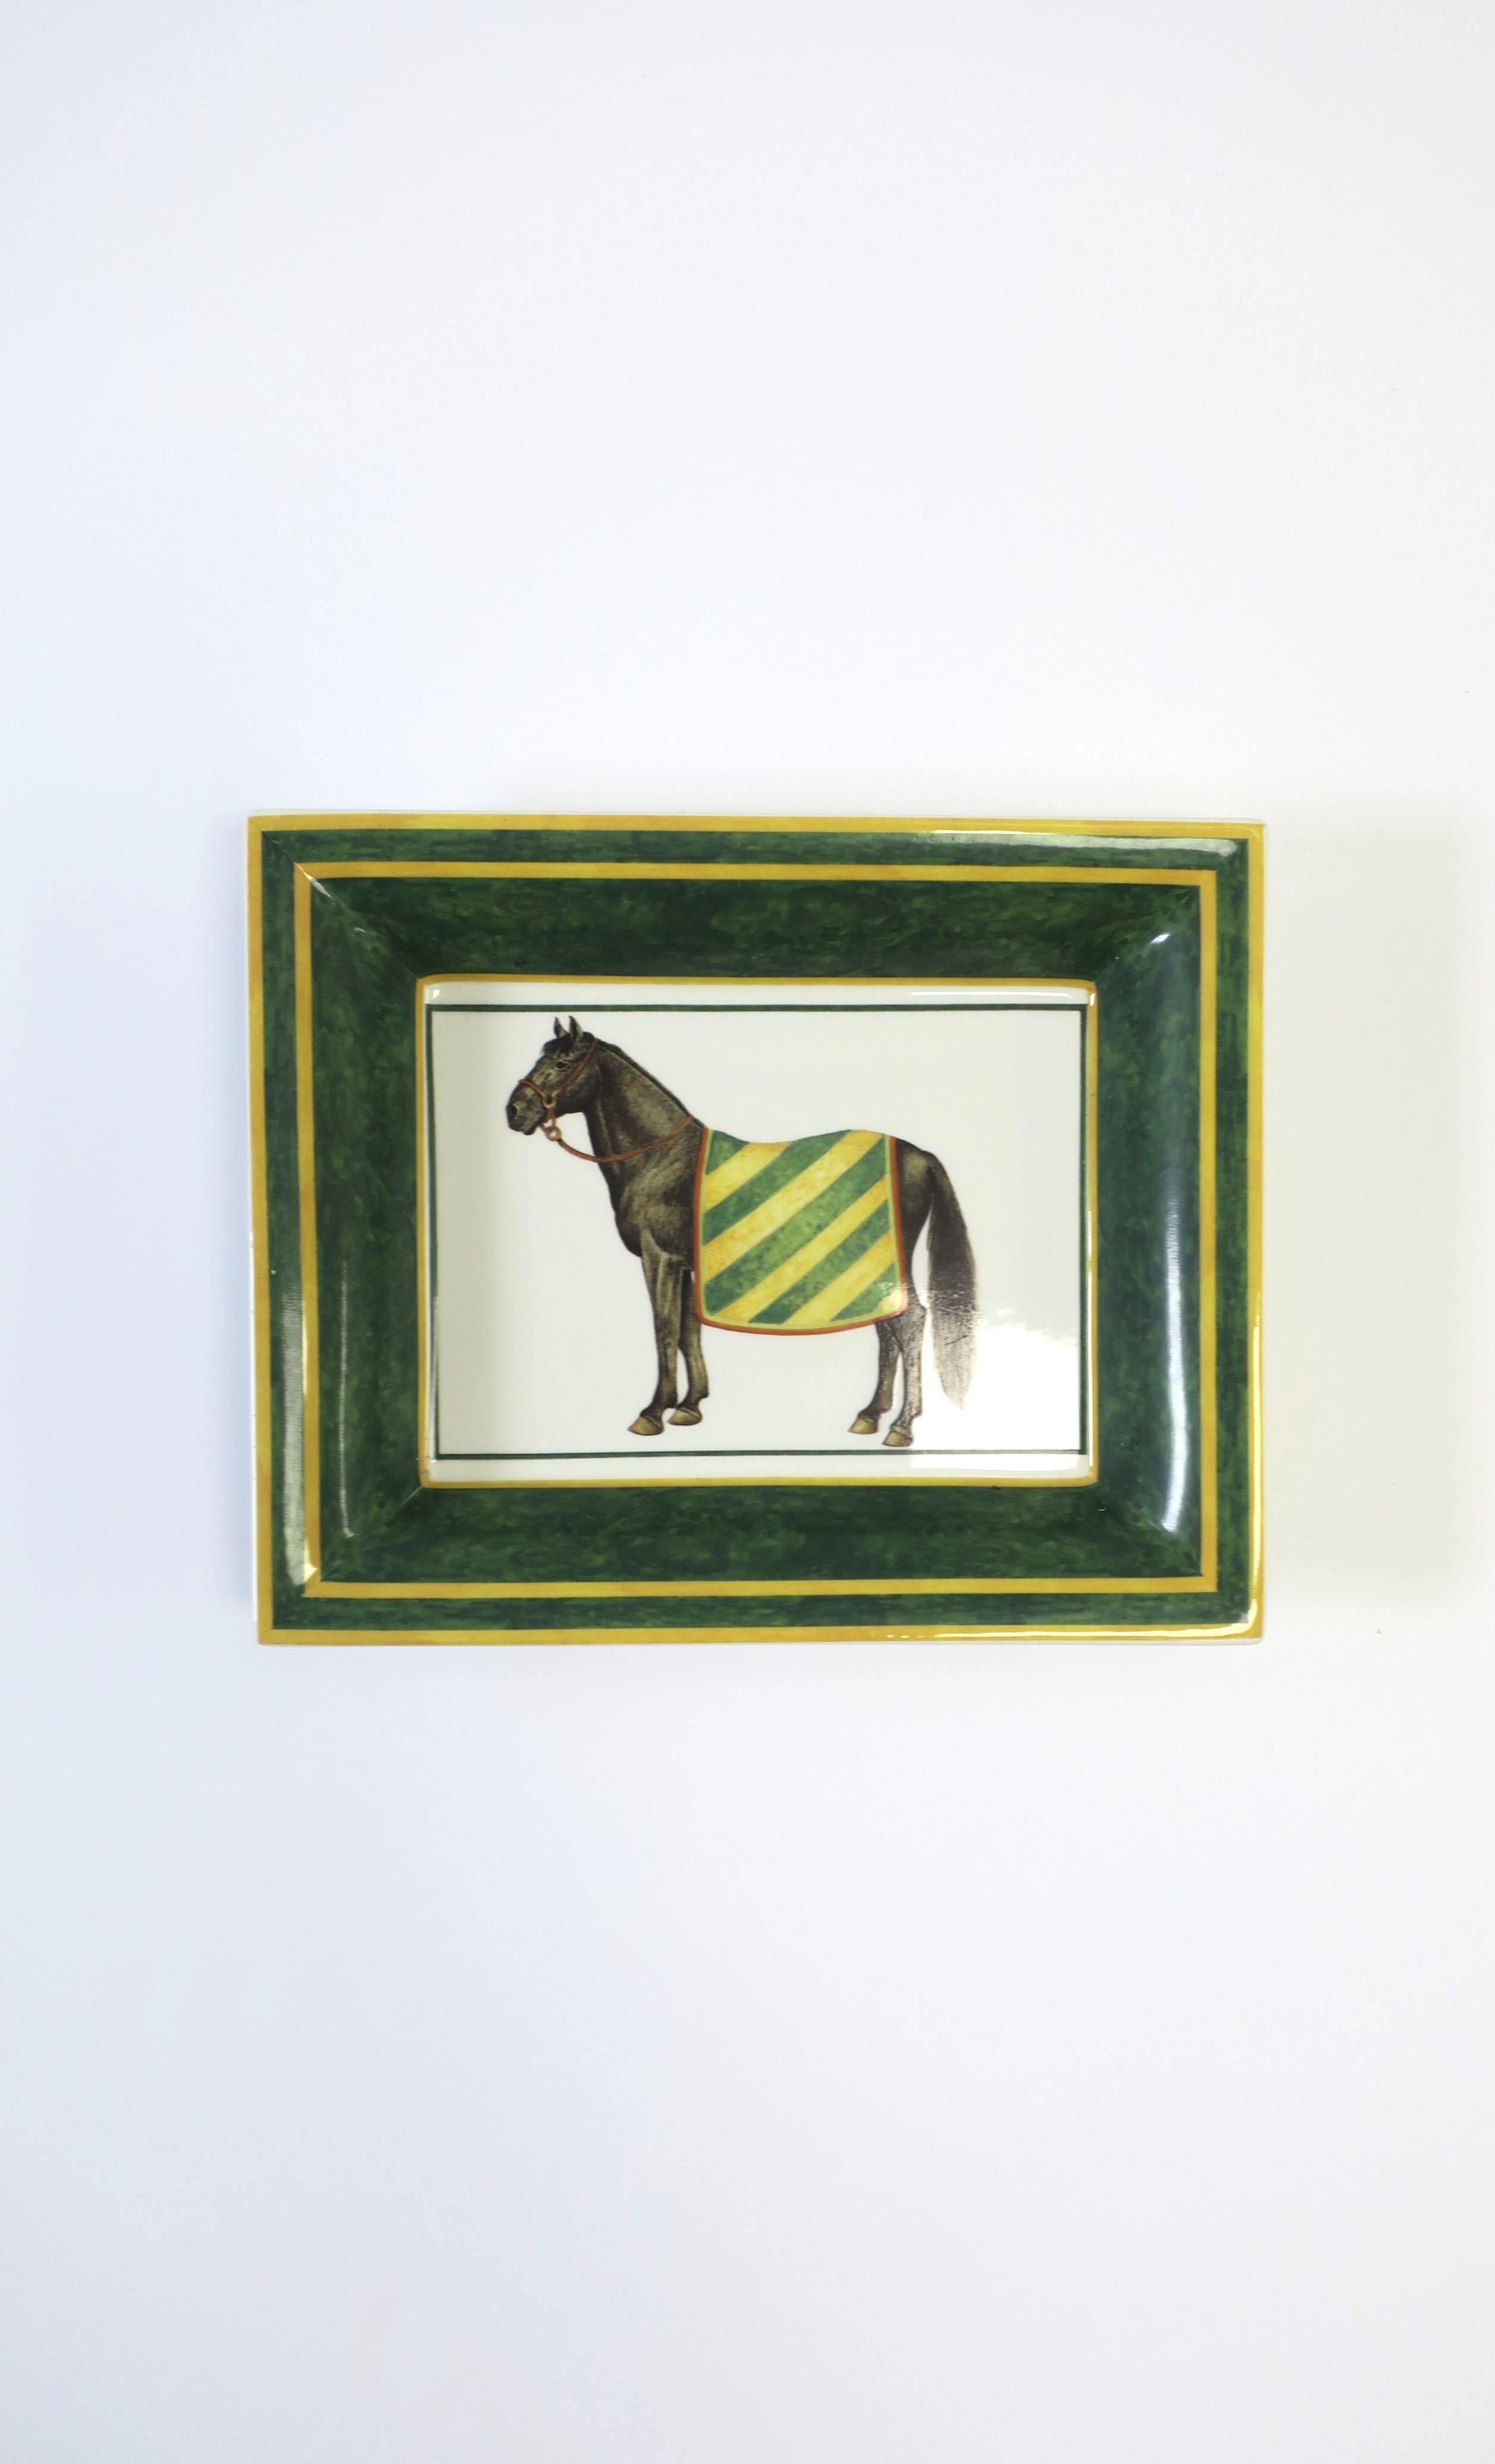 An Italian porcelain jewelry tray catchall/vide-poche dish with center thoroughbred equestrian, circa mid to late-20th century, Italy. Piece has a beautiful portrait of a black horse with colorful blanket. Colors include white porcelain, brown,